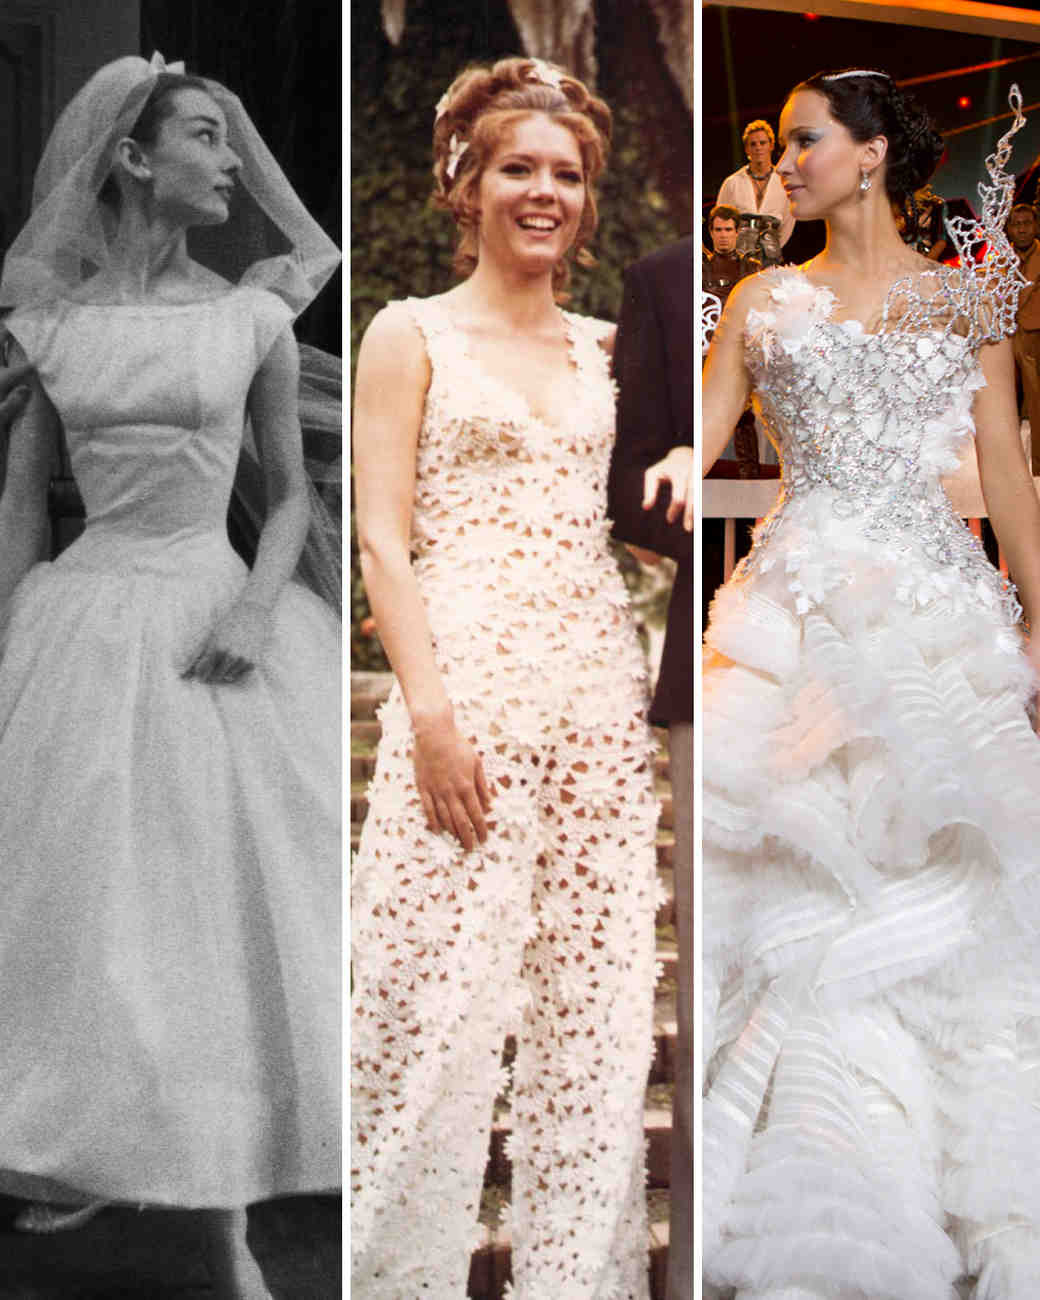 Iconic Wedding Dresses
 The Most Iconic Movie Wedding Dresses of All Time